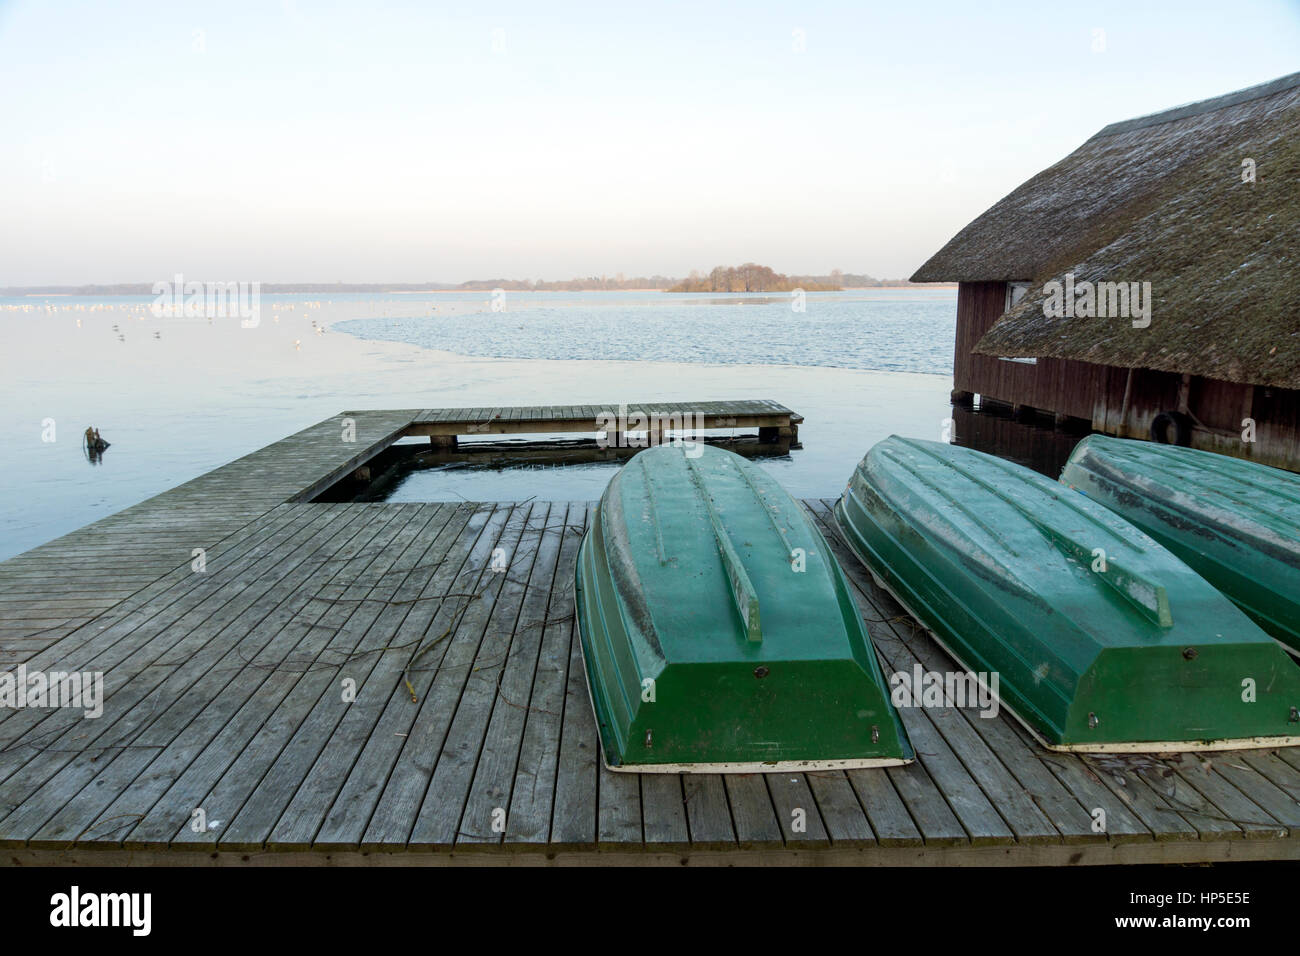 Boat dock at the lake with boat house Stock Photo